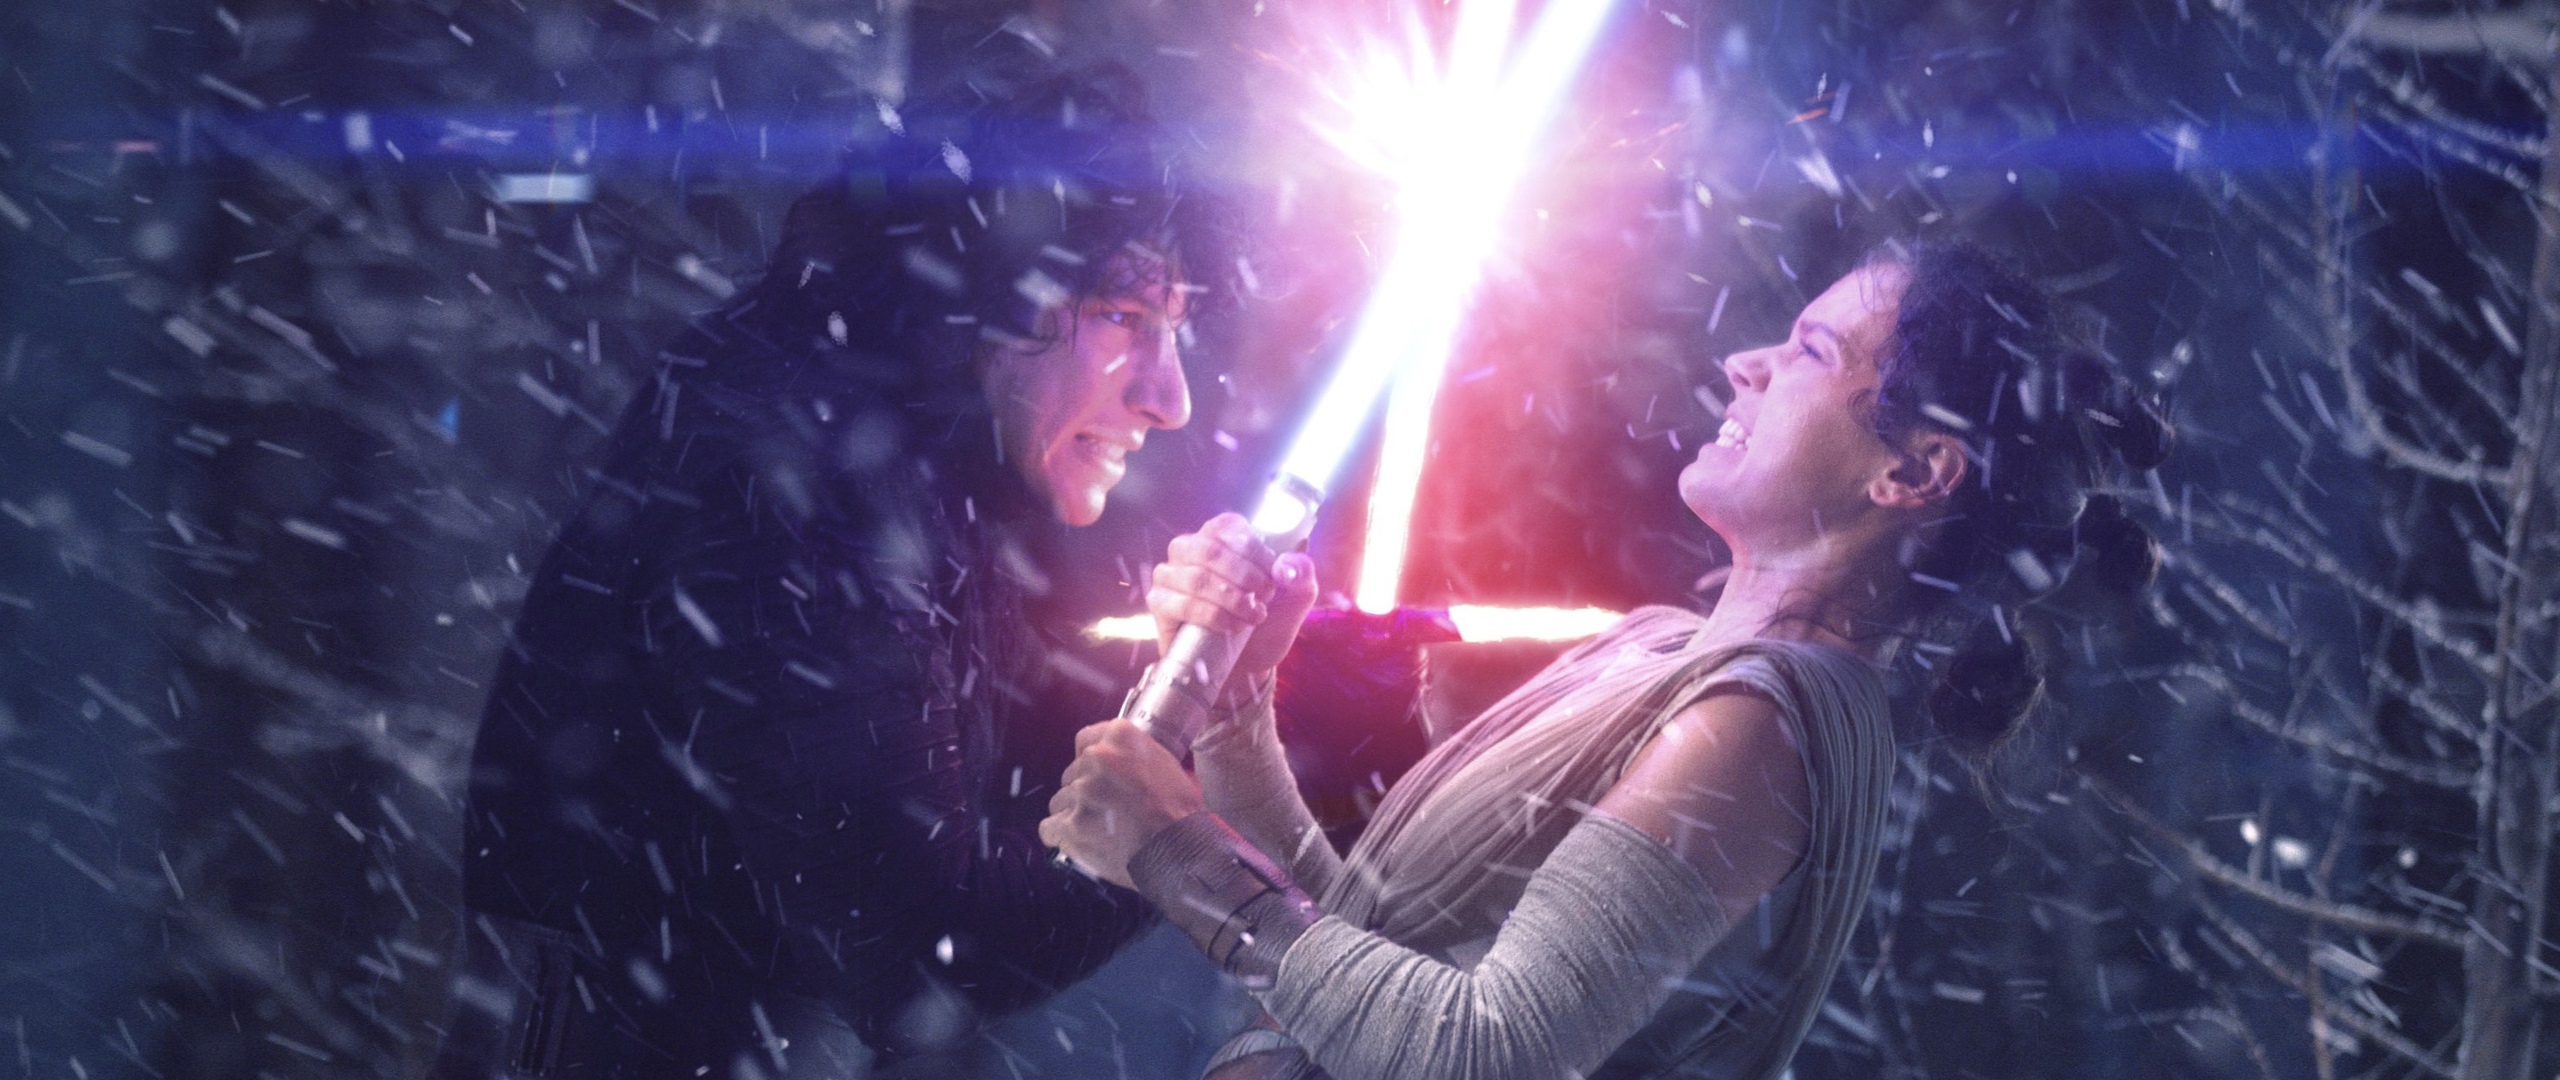 rey-and-kylo-ren-fighting-with-lightsaber-h3.jpg